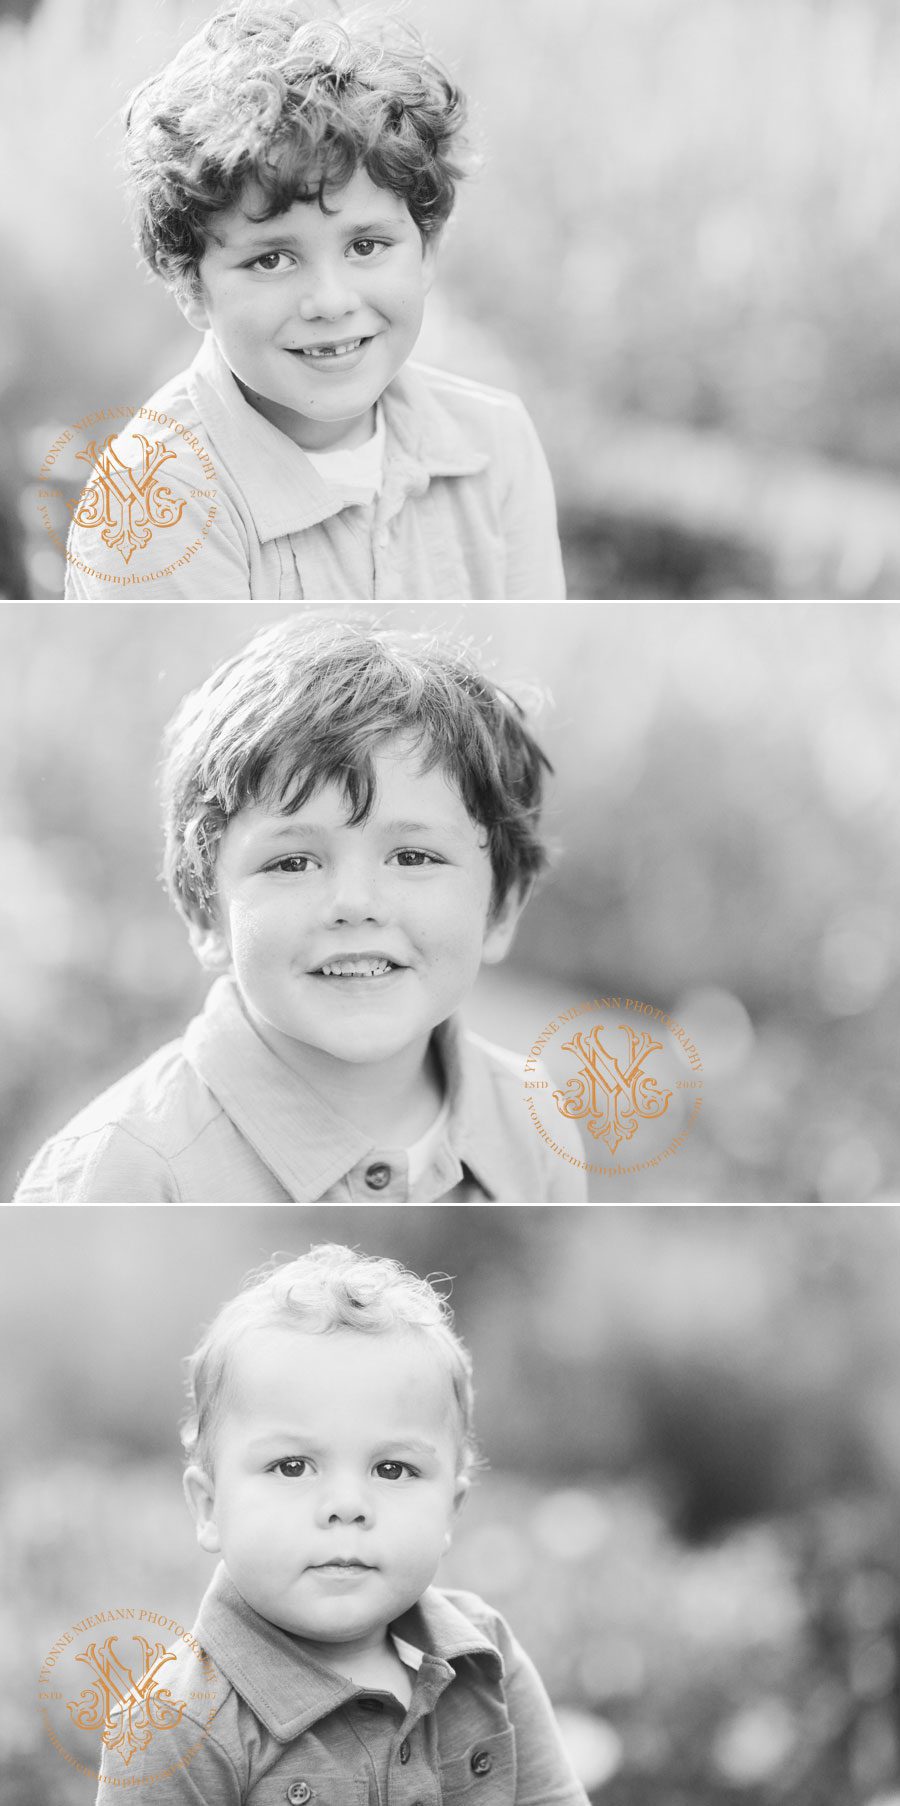 Child photography of boys taken by Athens, GA photographer.